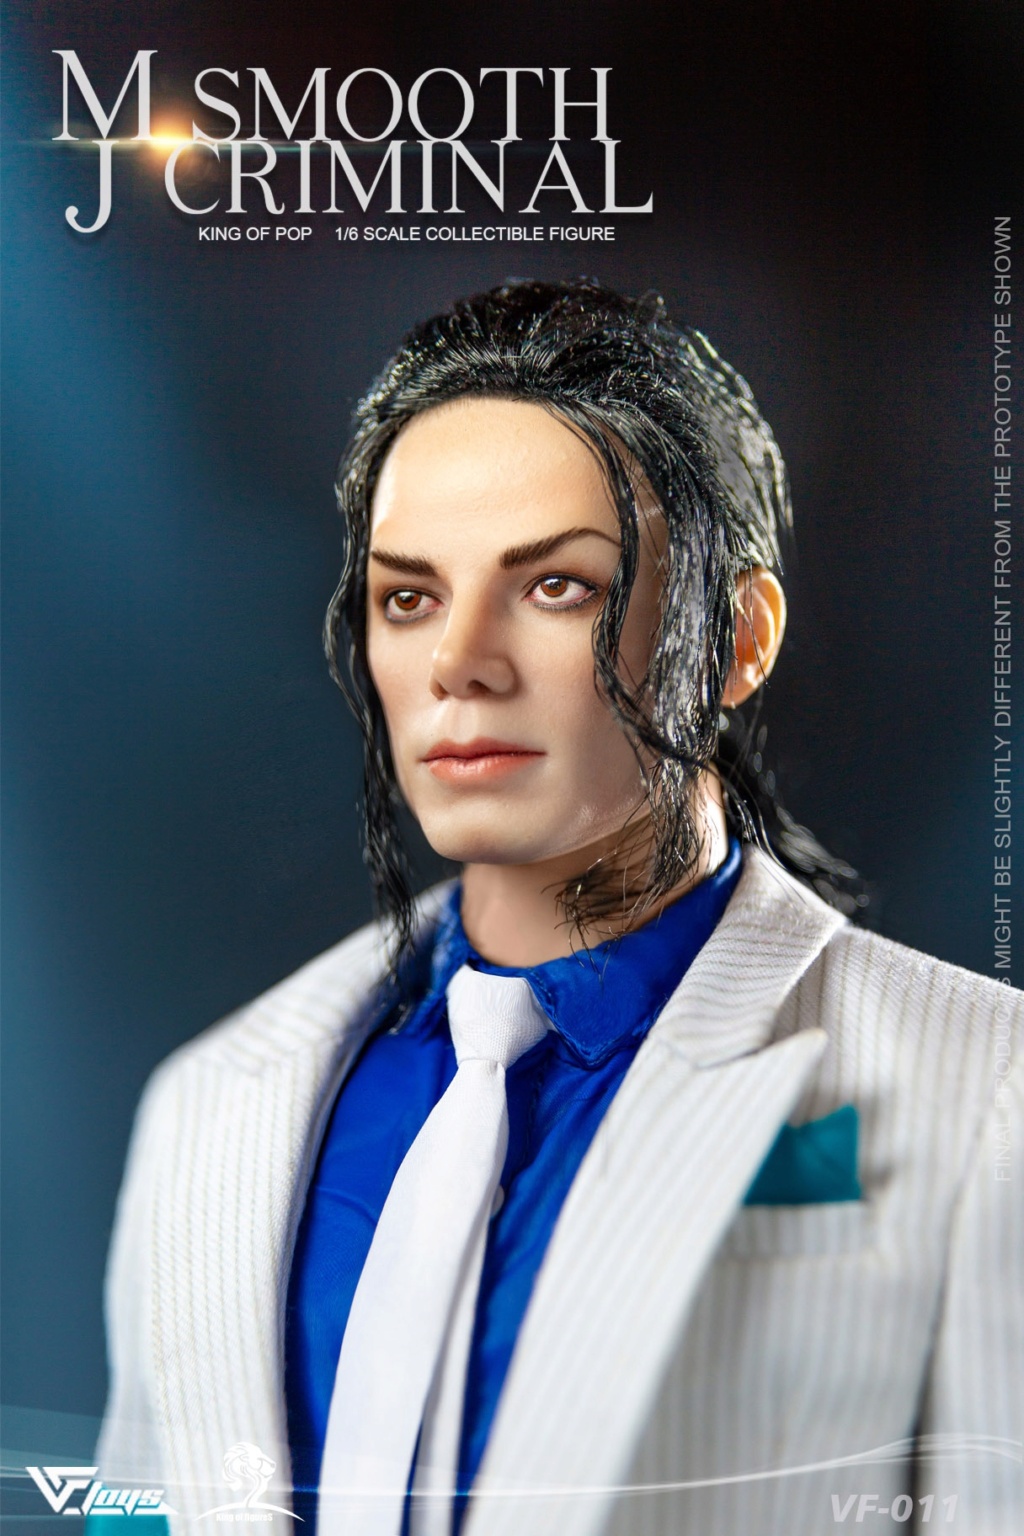 Male - NEW PRODUCT: VFTOYS: VF-011 1/6 Scale MJ Smooth Criminal 16190210